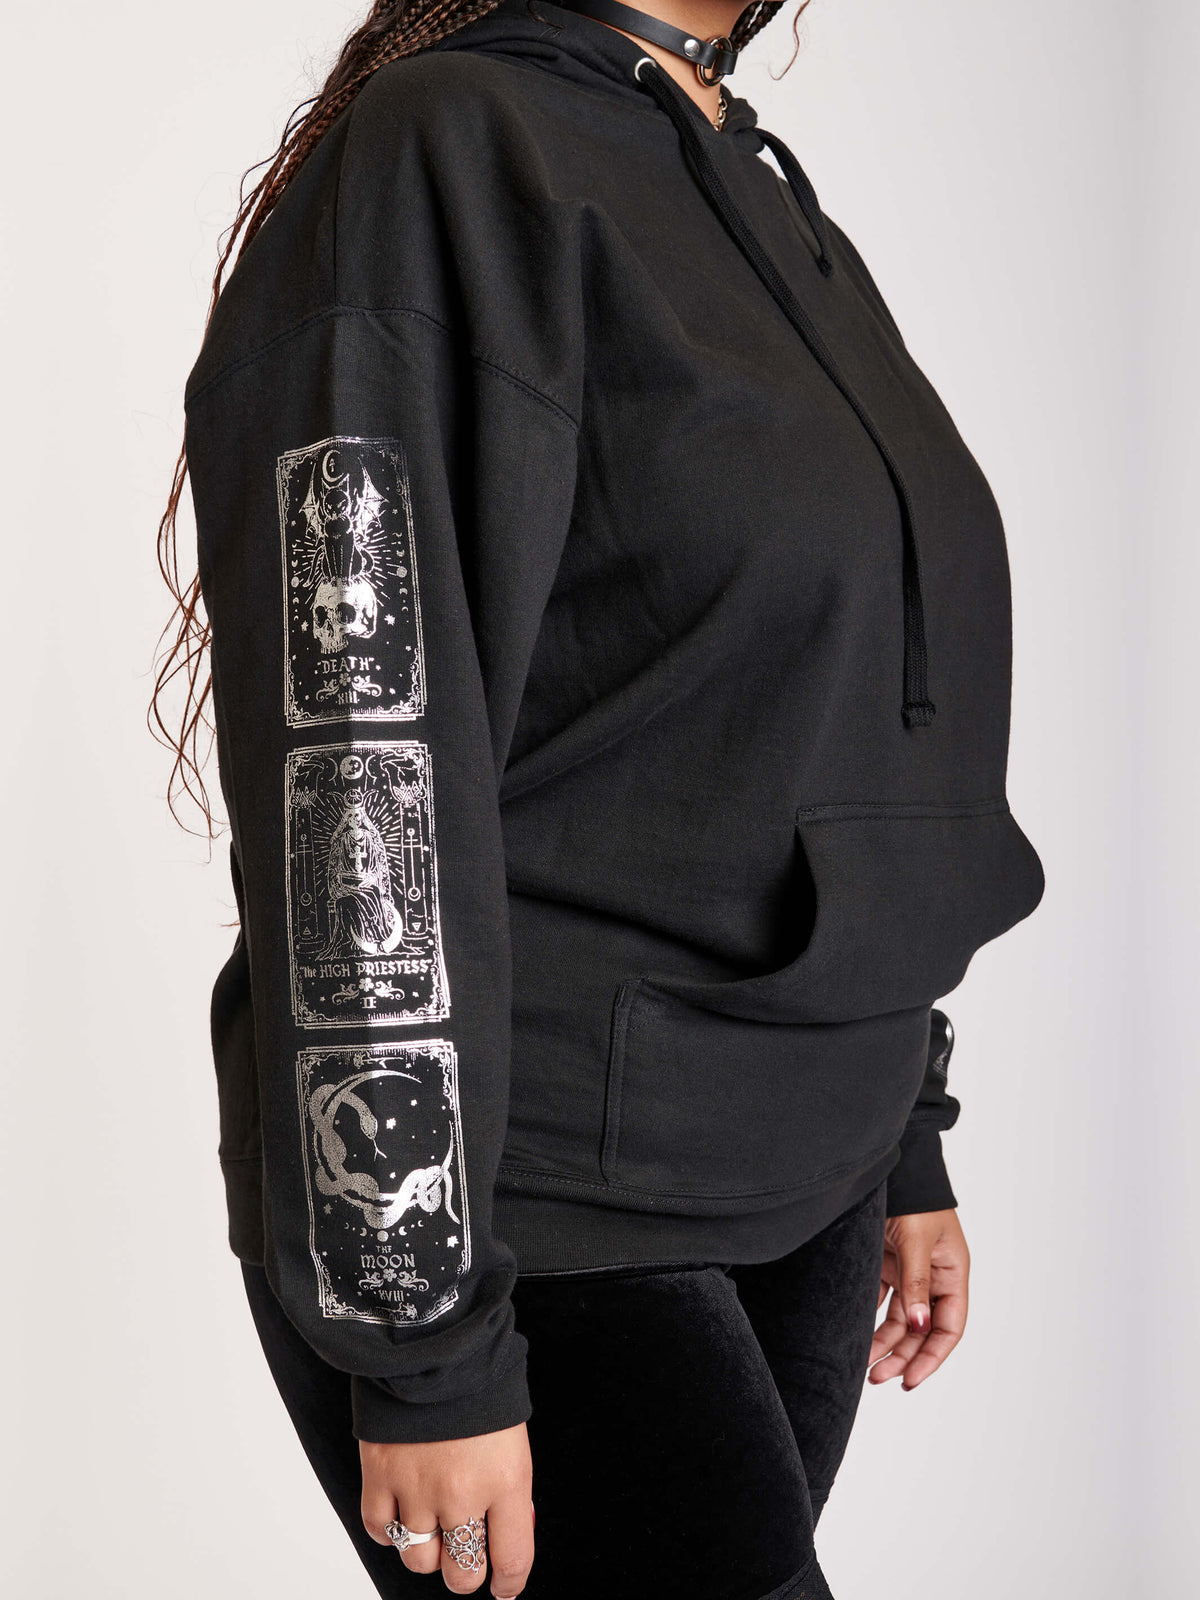 Black hoodie with silver back and arm graphics